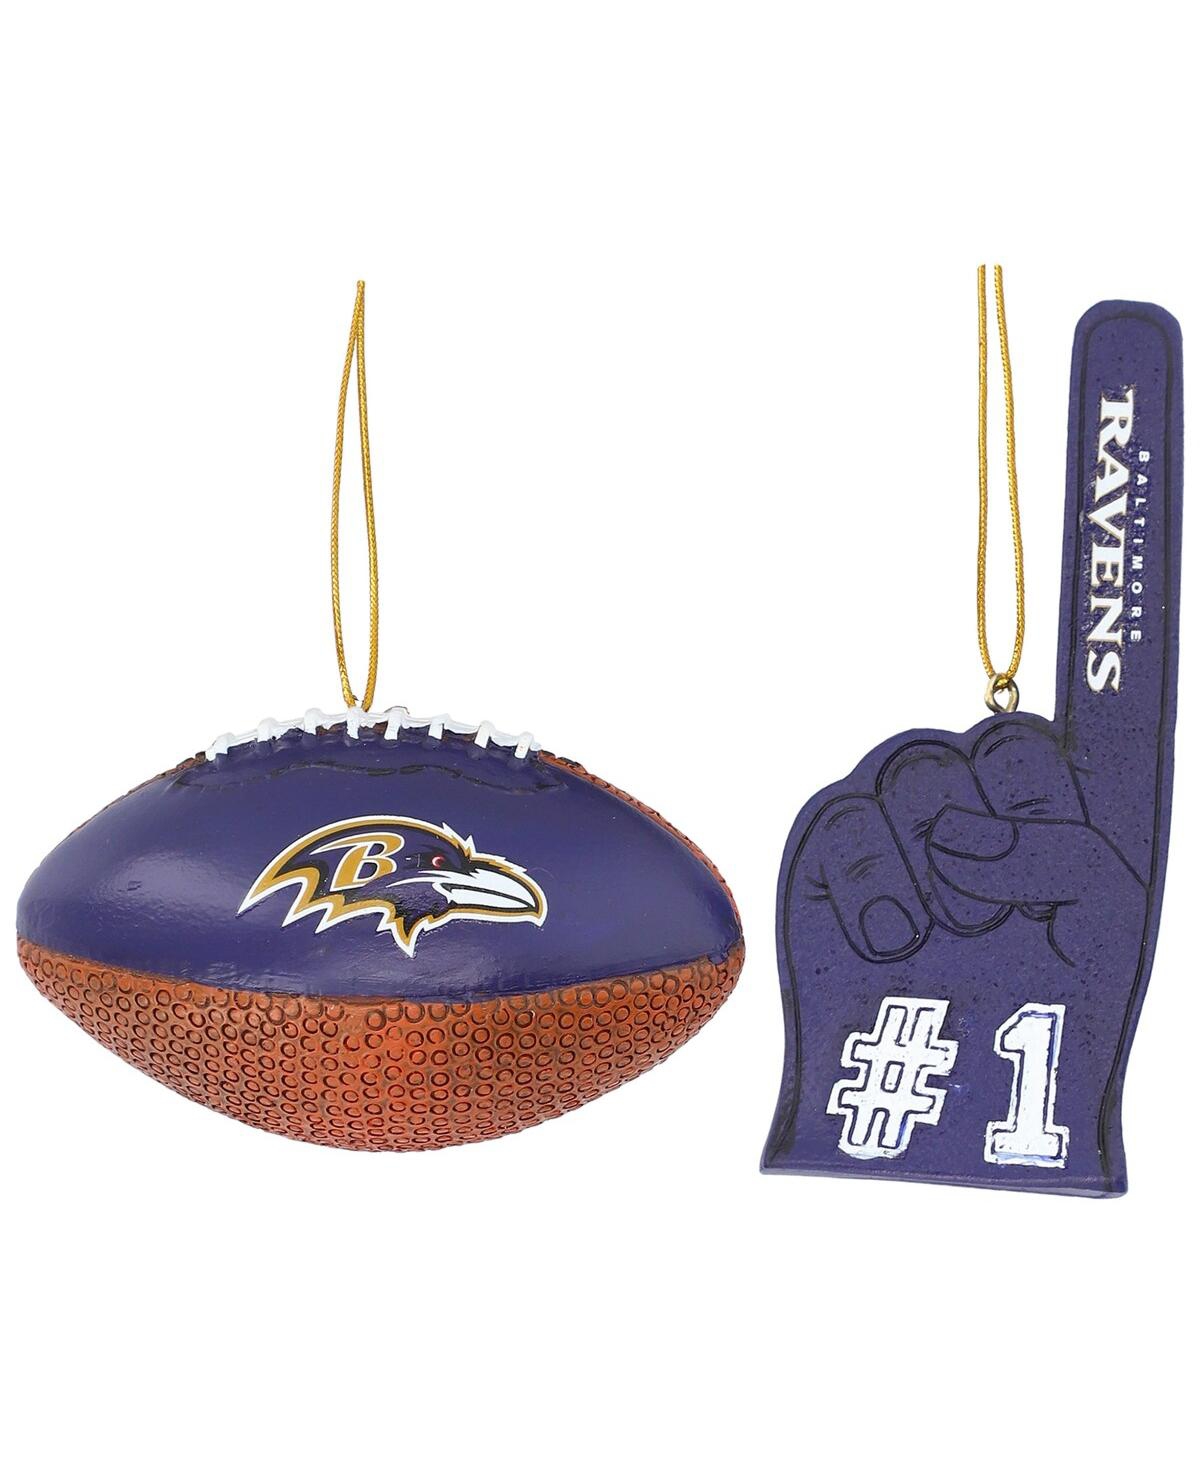 The Memory Company Baltimore Ravens Football and Foam Finger Ornament Two-Pack - Purple